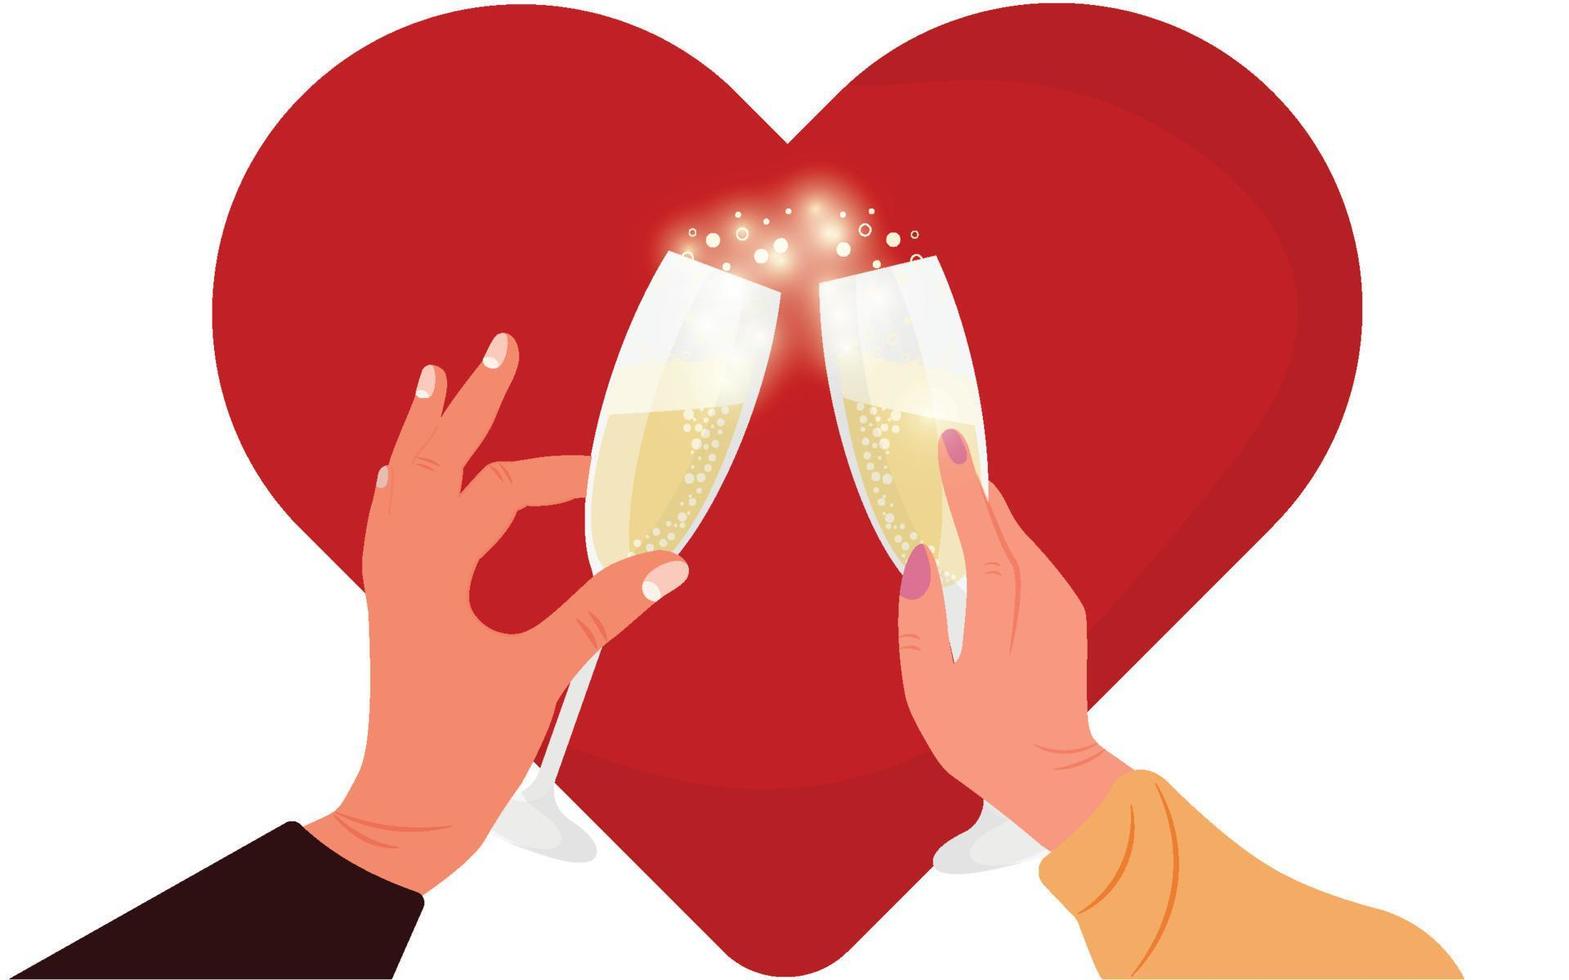 The hand of a man and a woman are holding a glass of champagne against the background of a heart. Vector illustration